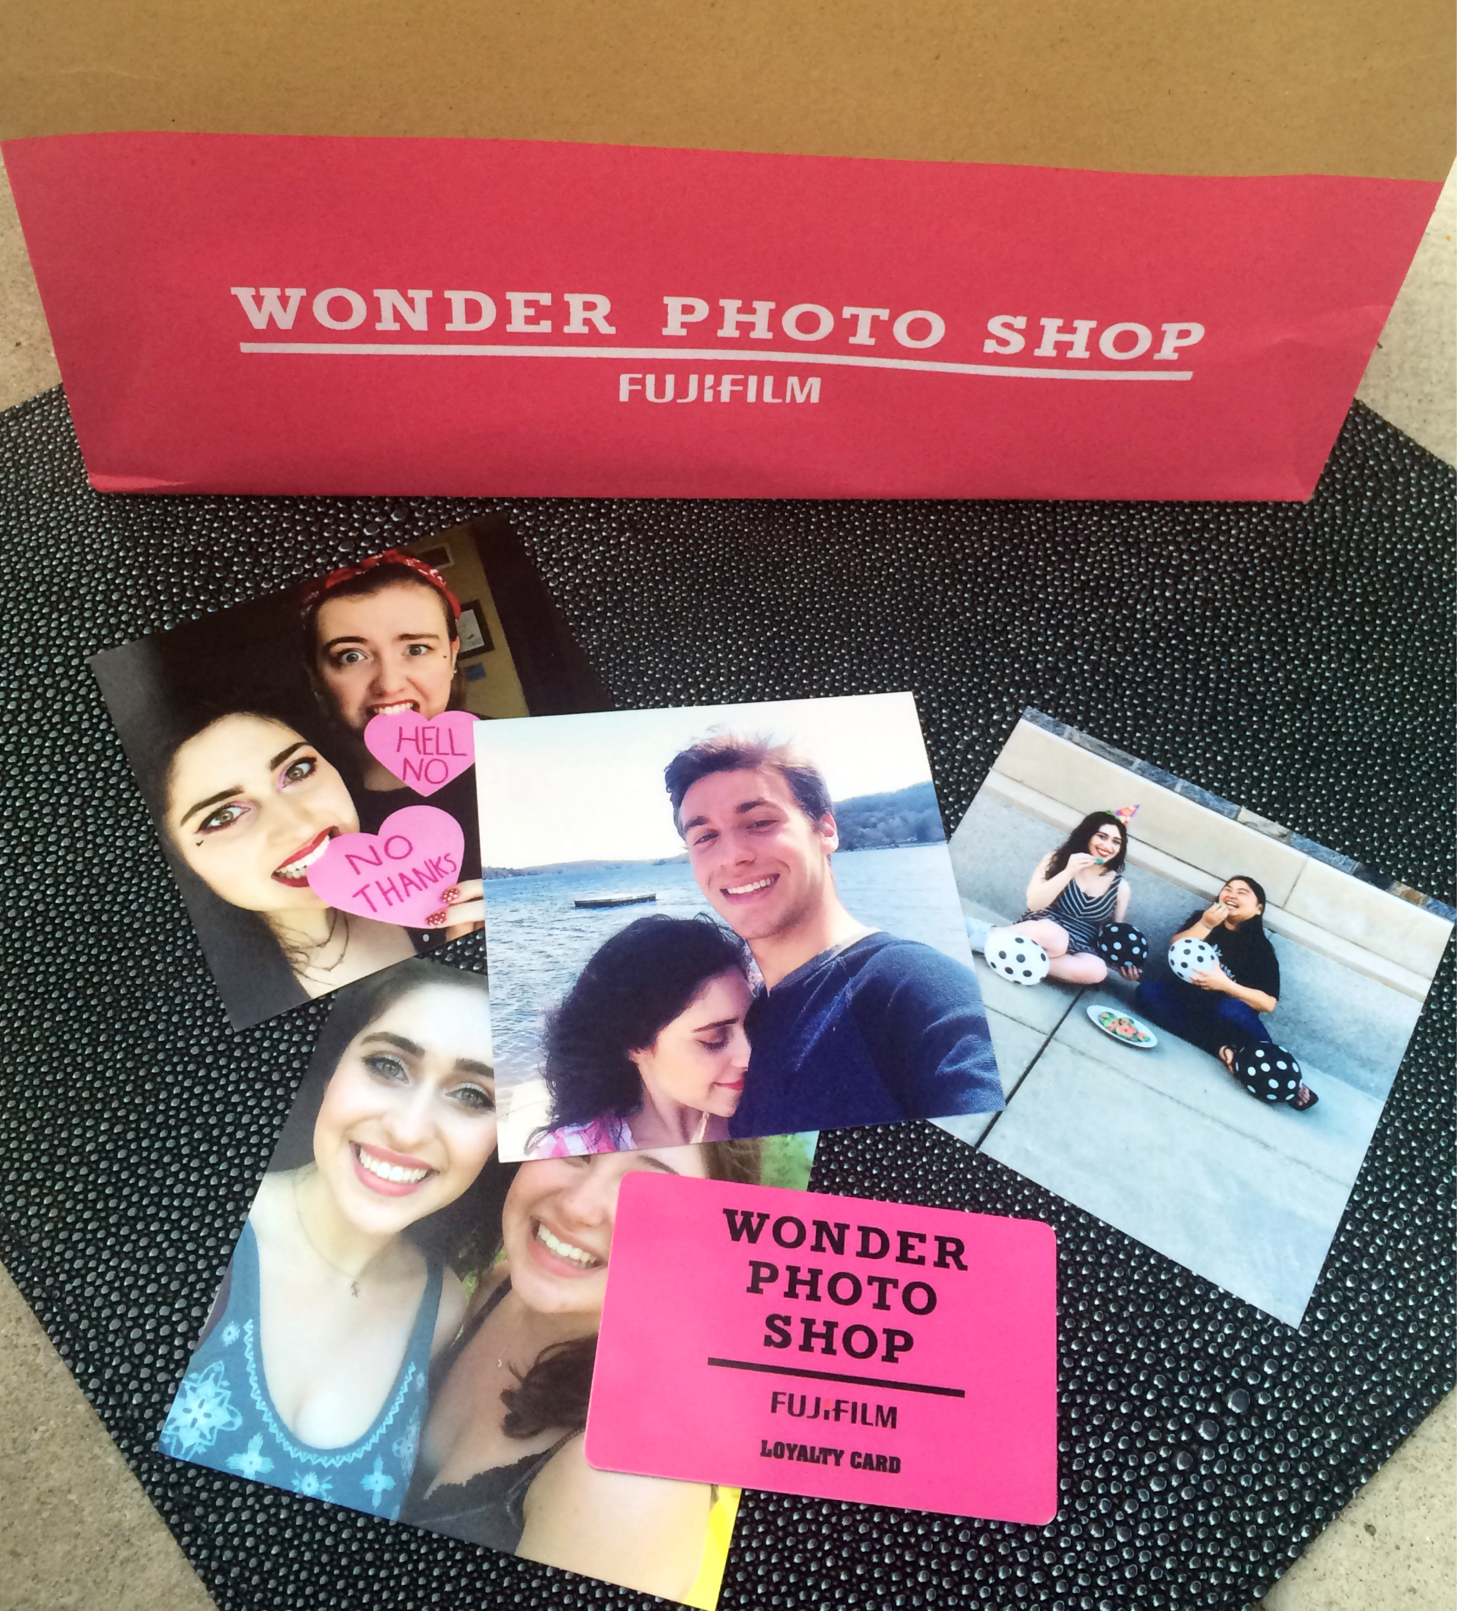 Unique Things to do in NYC: Fujifilm Wonder Photo Shop